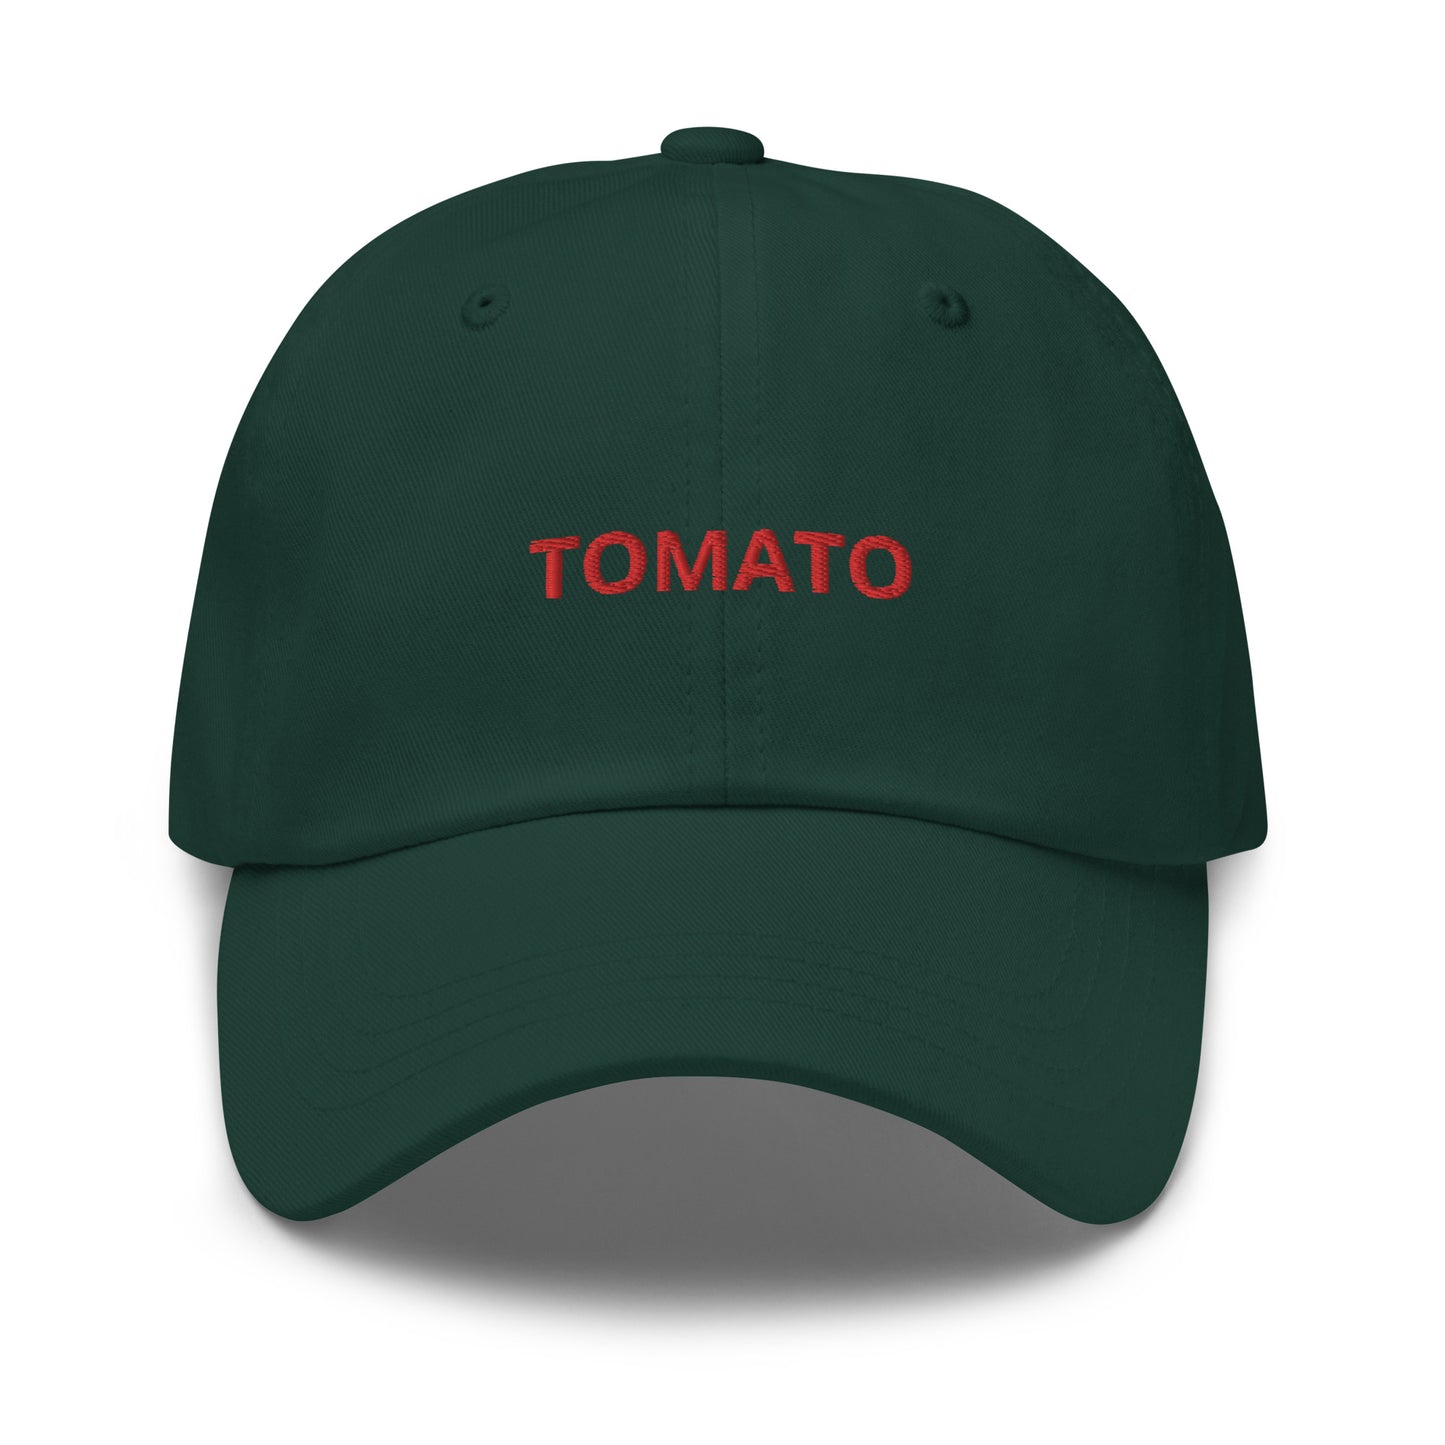 Limited Edition WYS x Produce Parties Tomato Hat